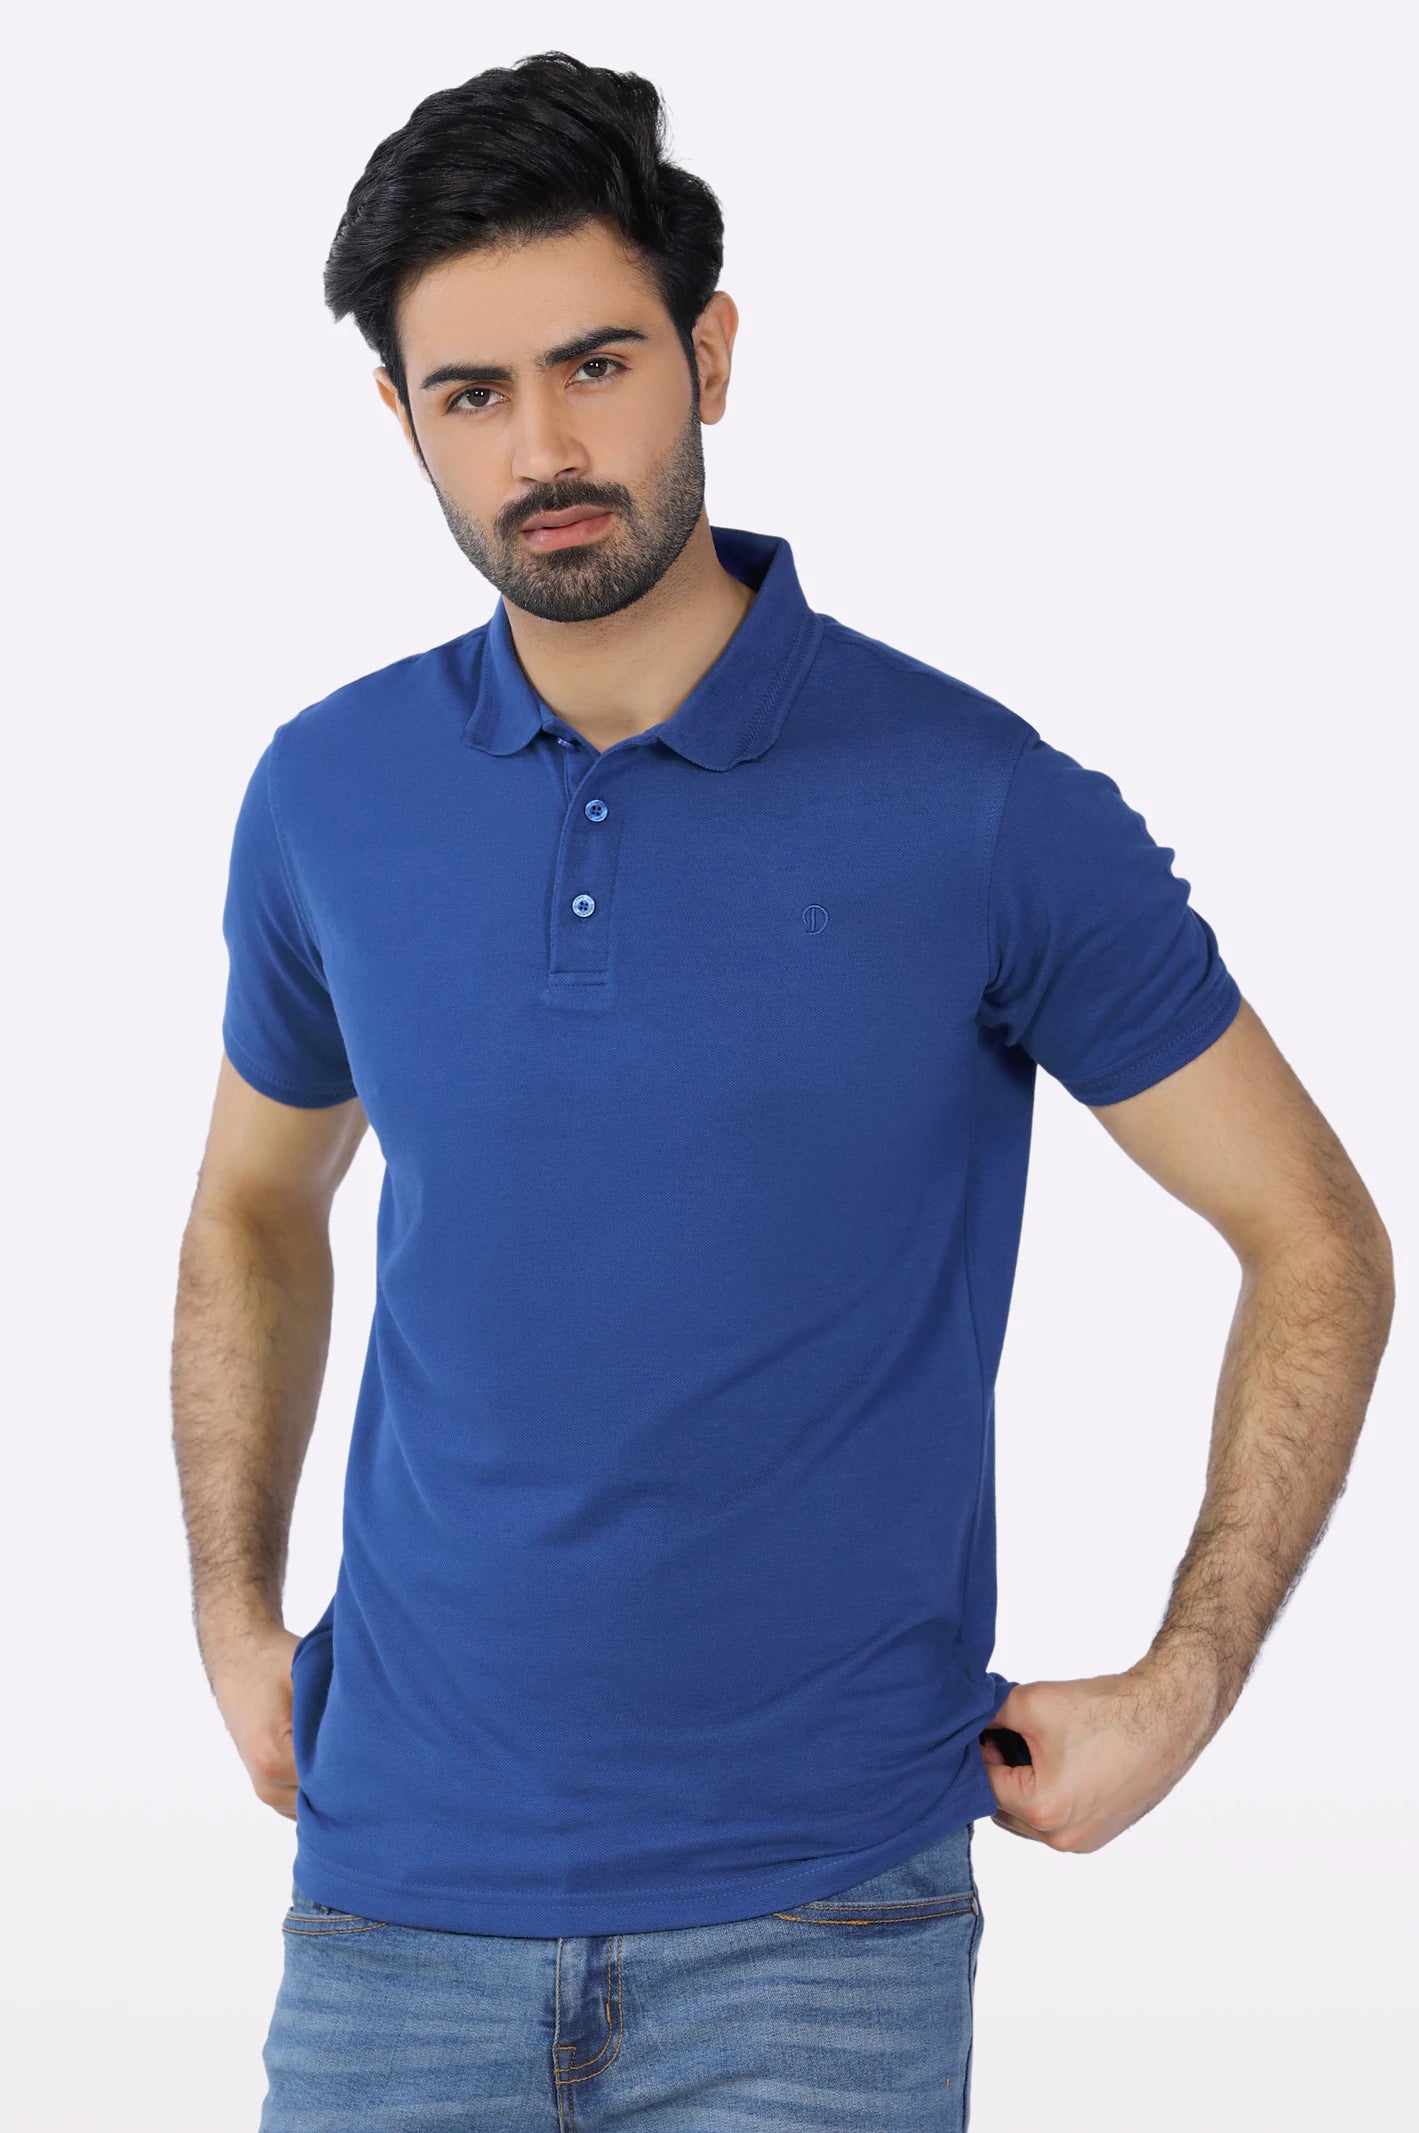 Royal Blue Jacquard Collar Polo From Diners